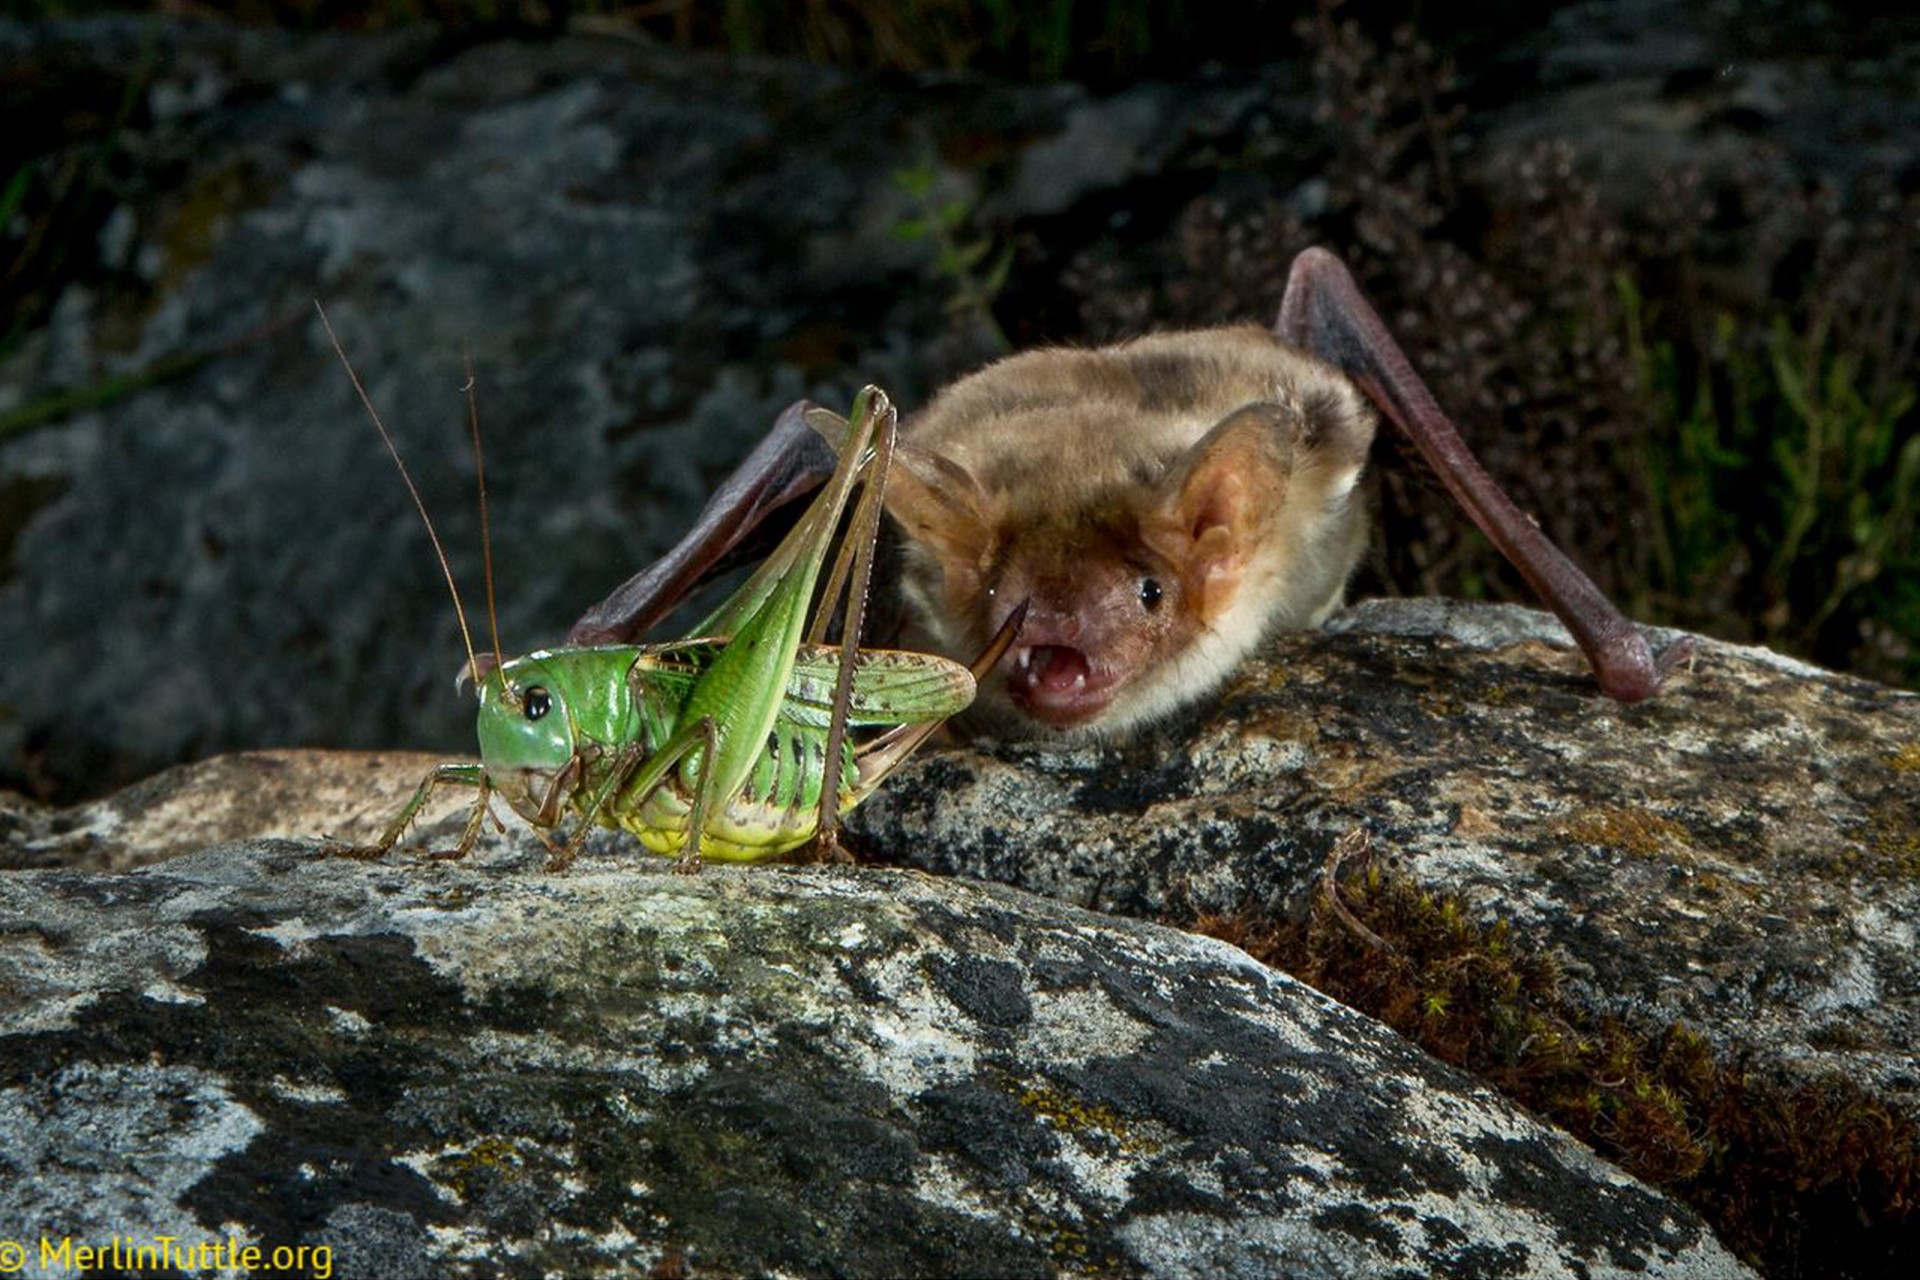 Bats use private and social information as they hunt